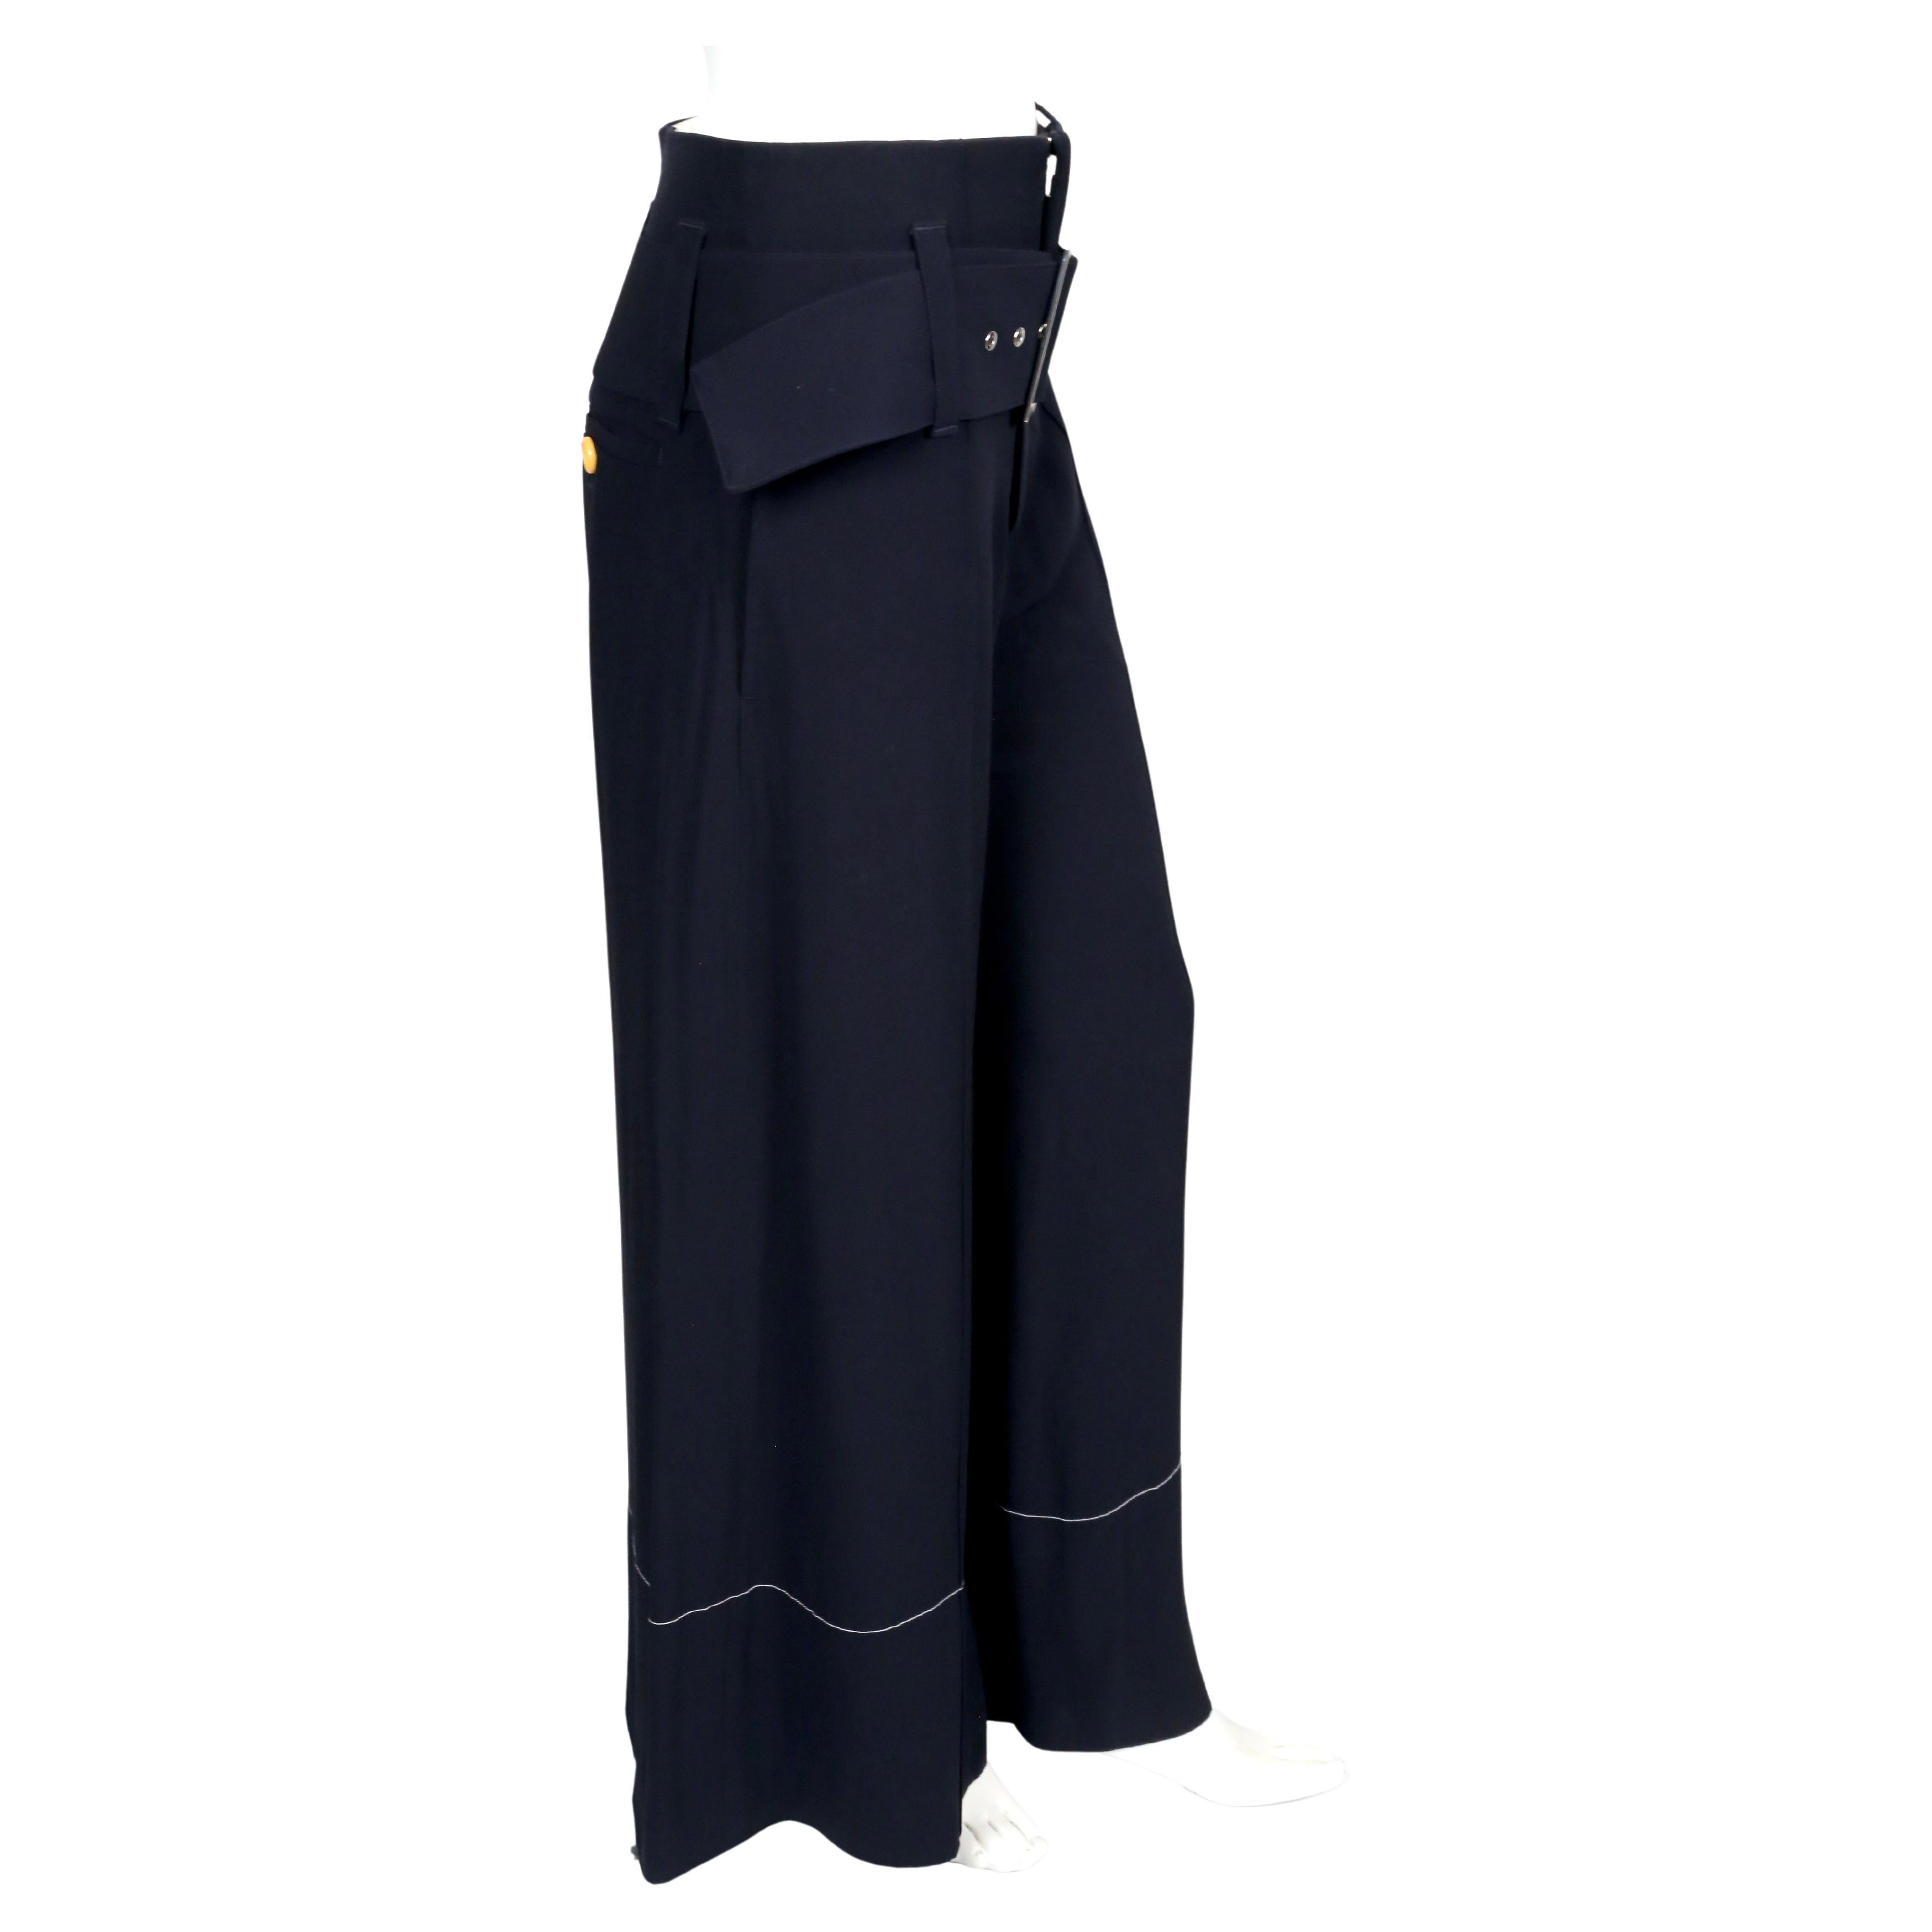 Women's or Men's CELINE by PHOEBE PHILO navy blue pants with wide belt and contrast topstitching